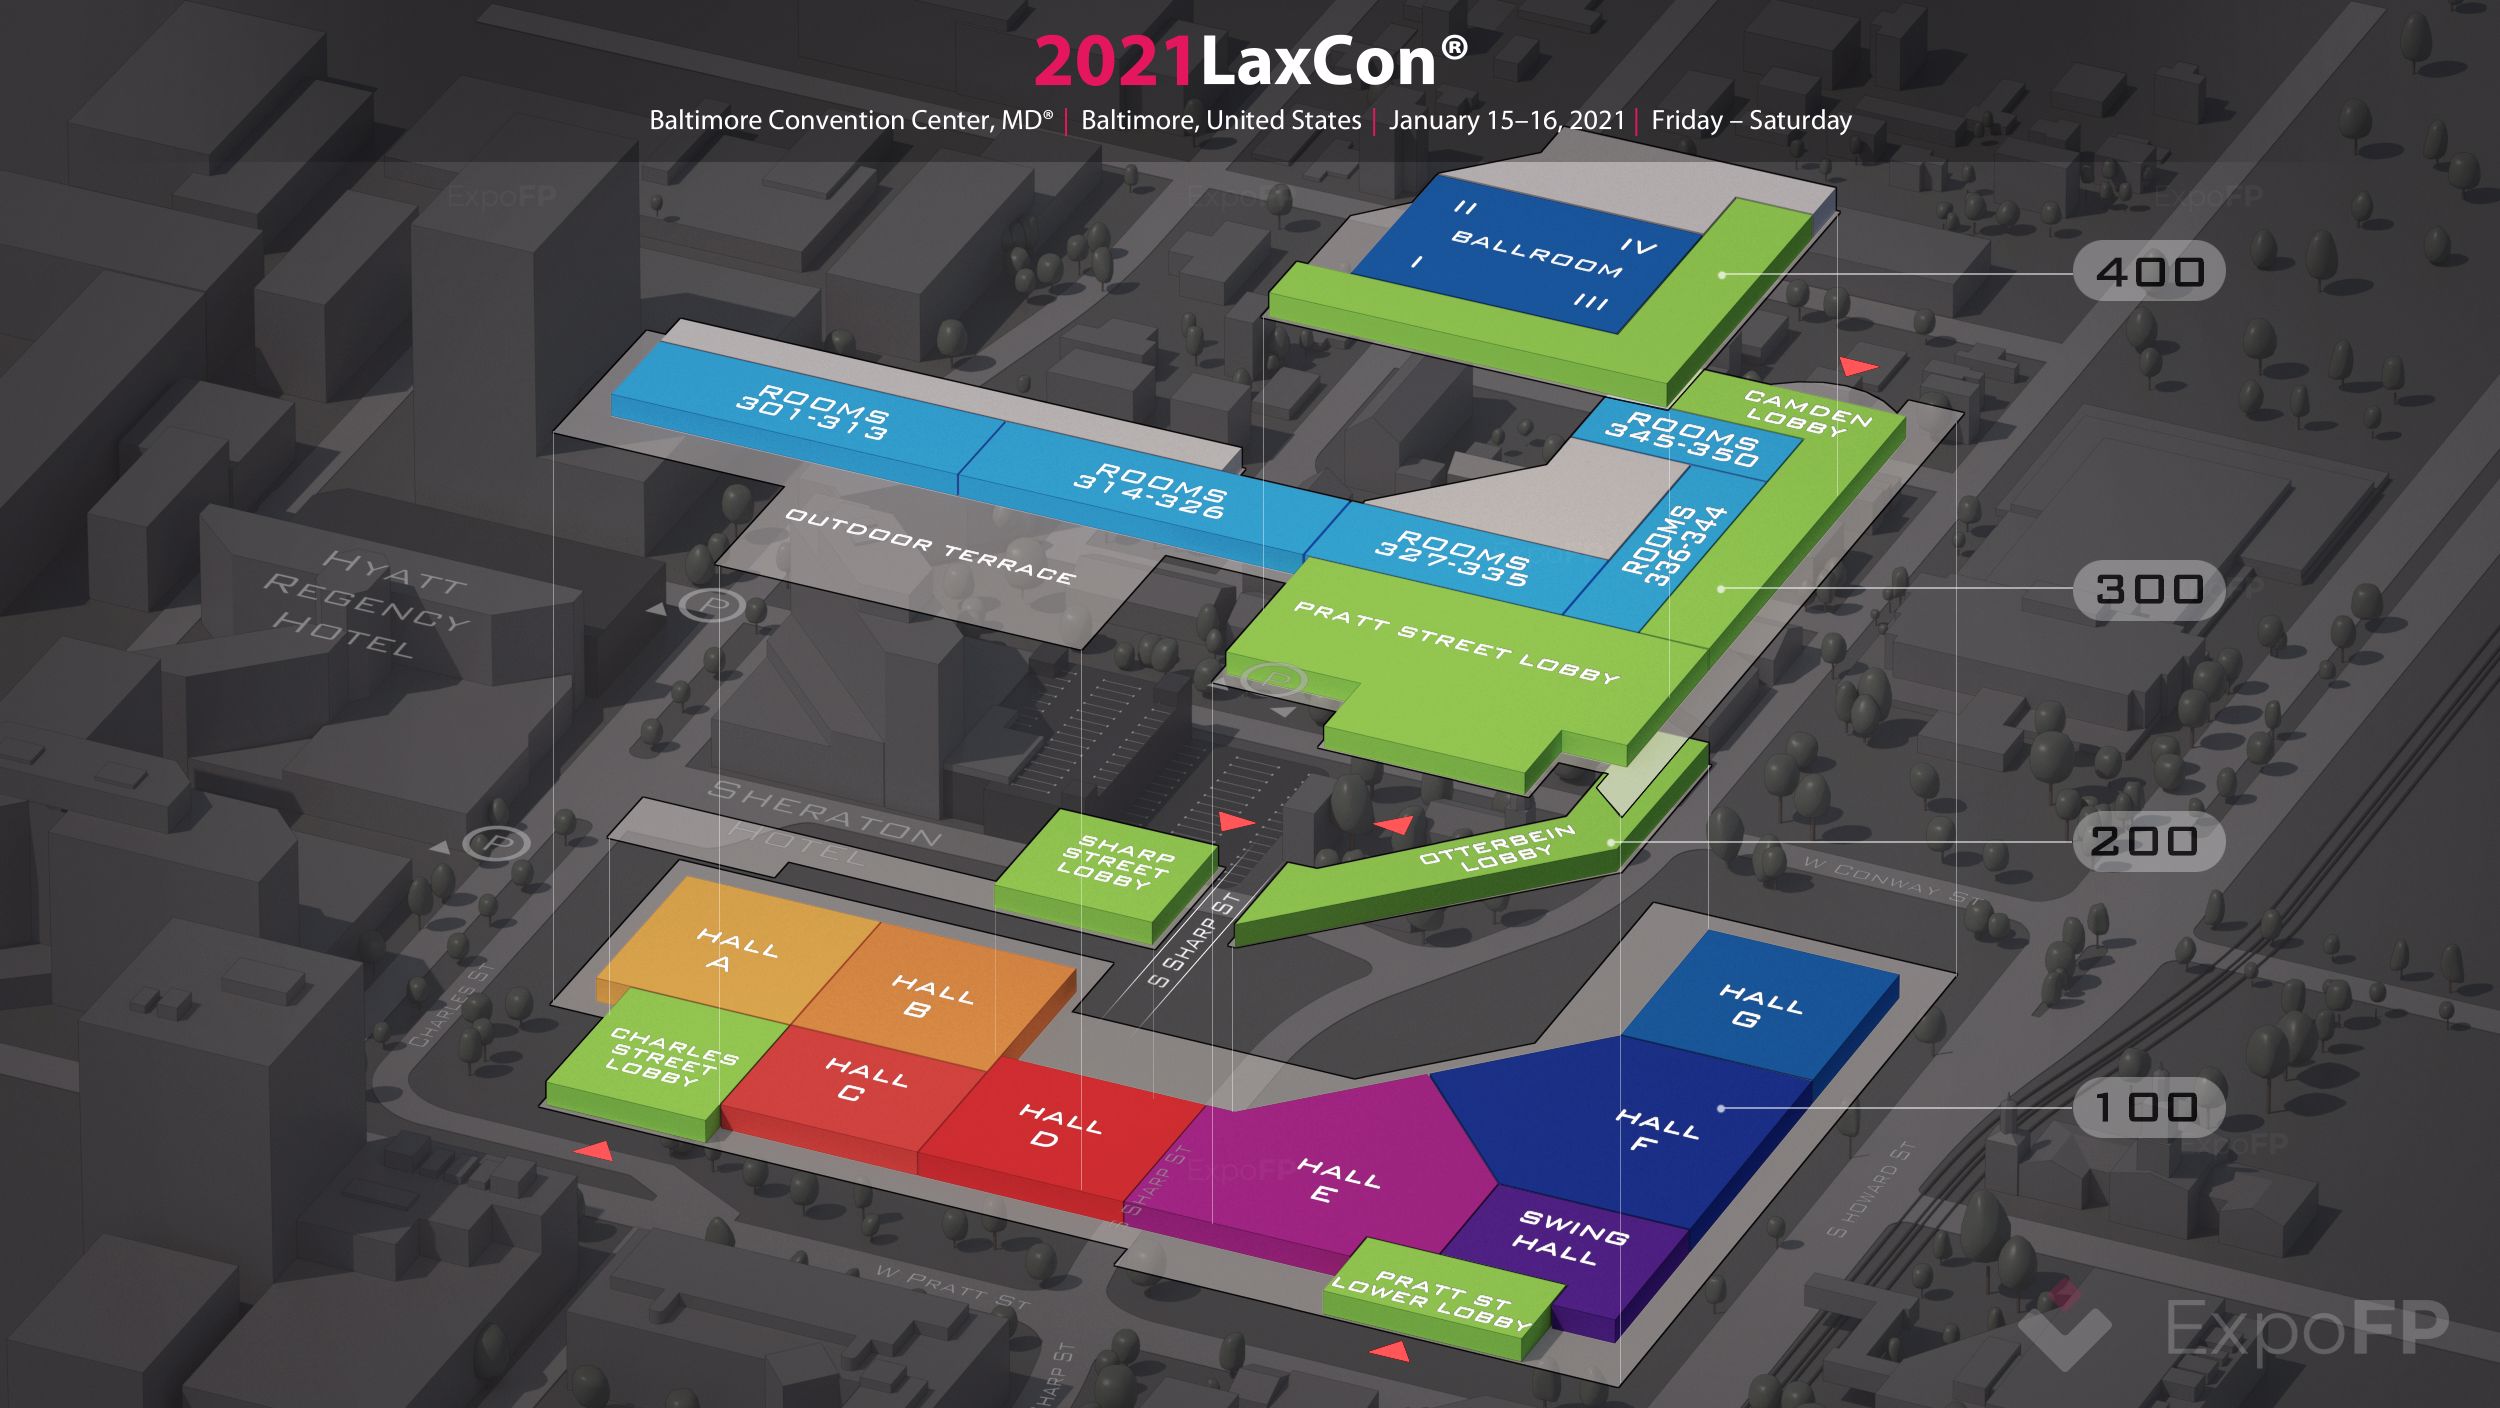 LaxCon 2021 in Baltimore Convention Center, MD